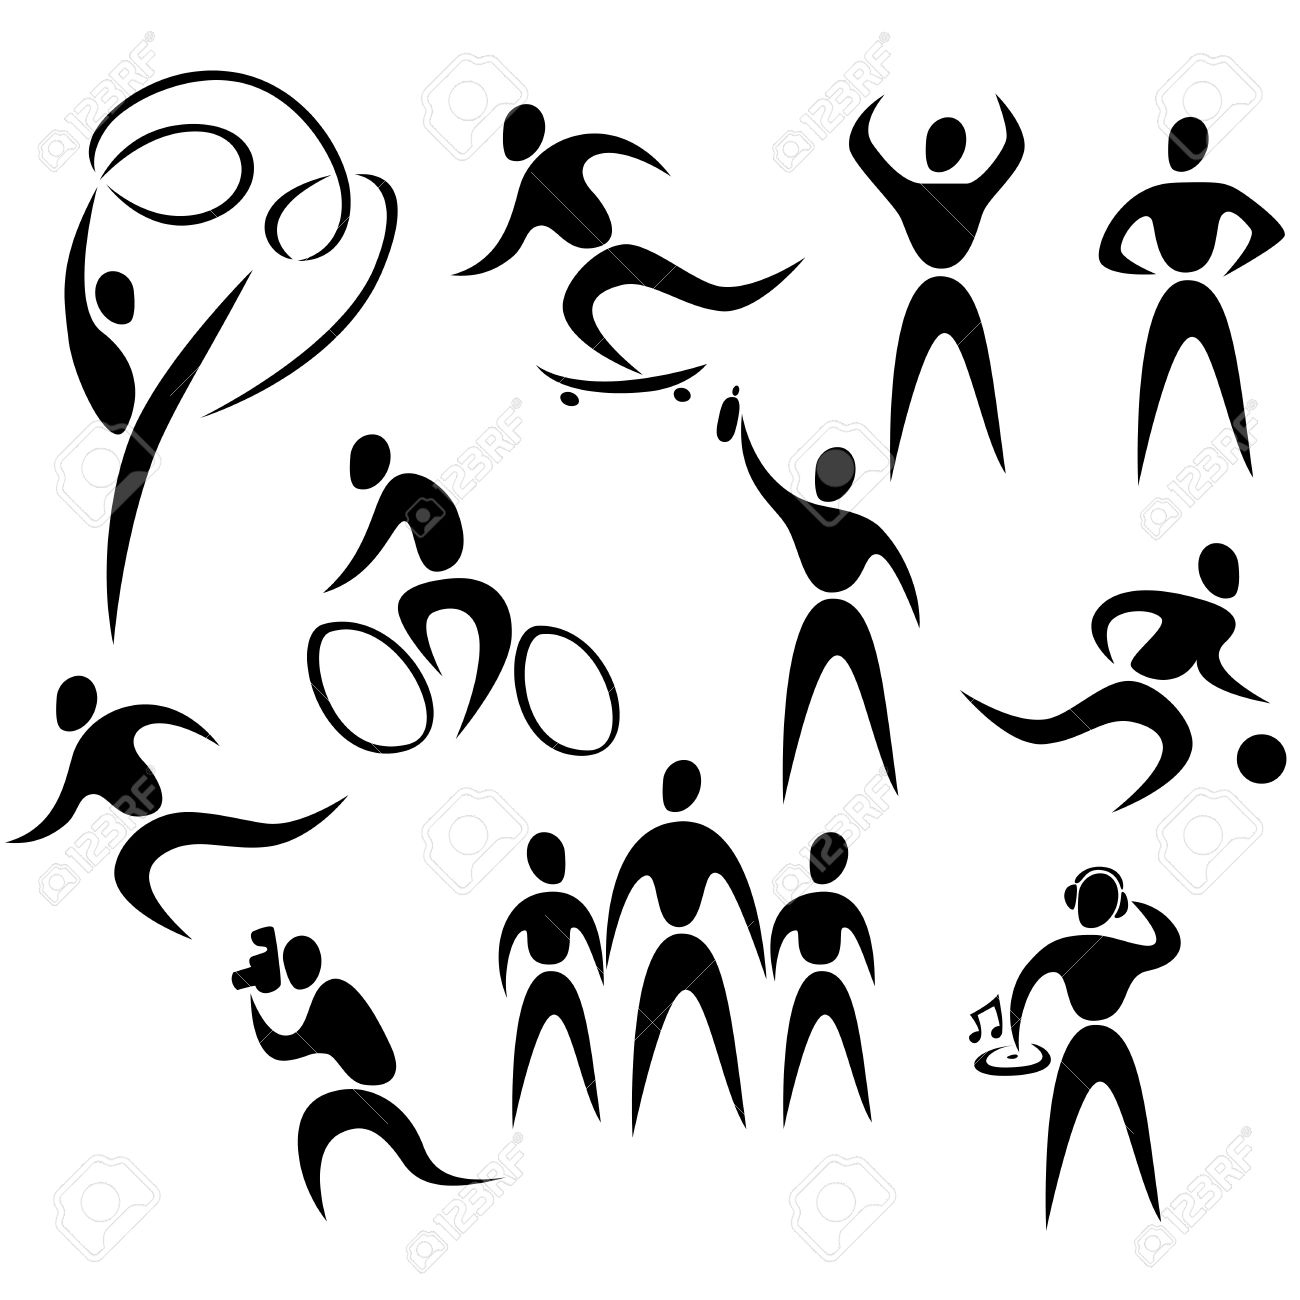 Active people clipart